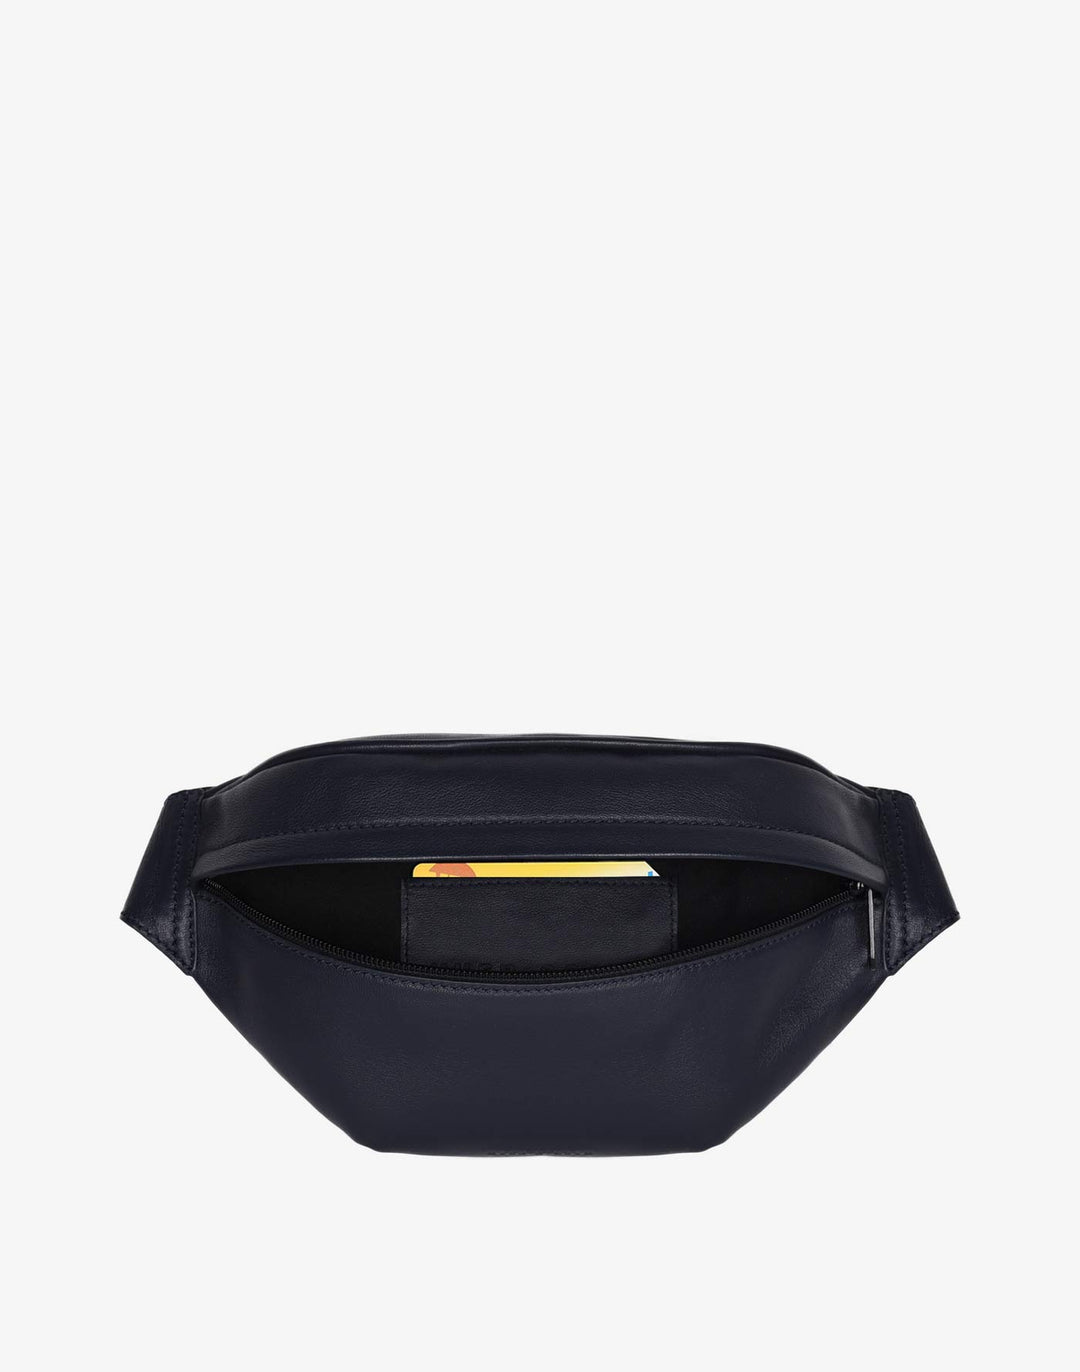 Hyer Goods_Fanny Pack_Navy_#color_almost-black